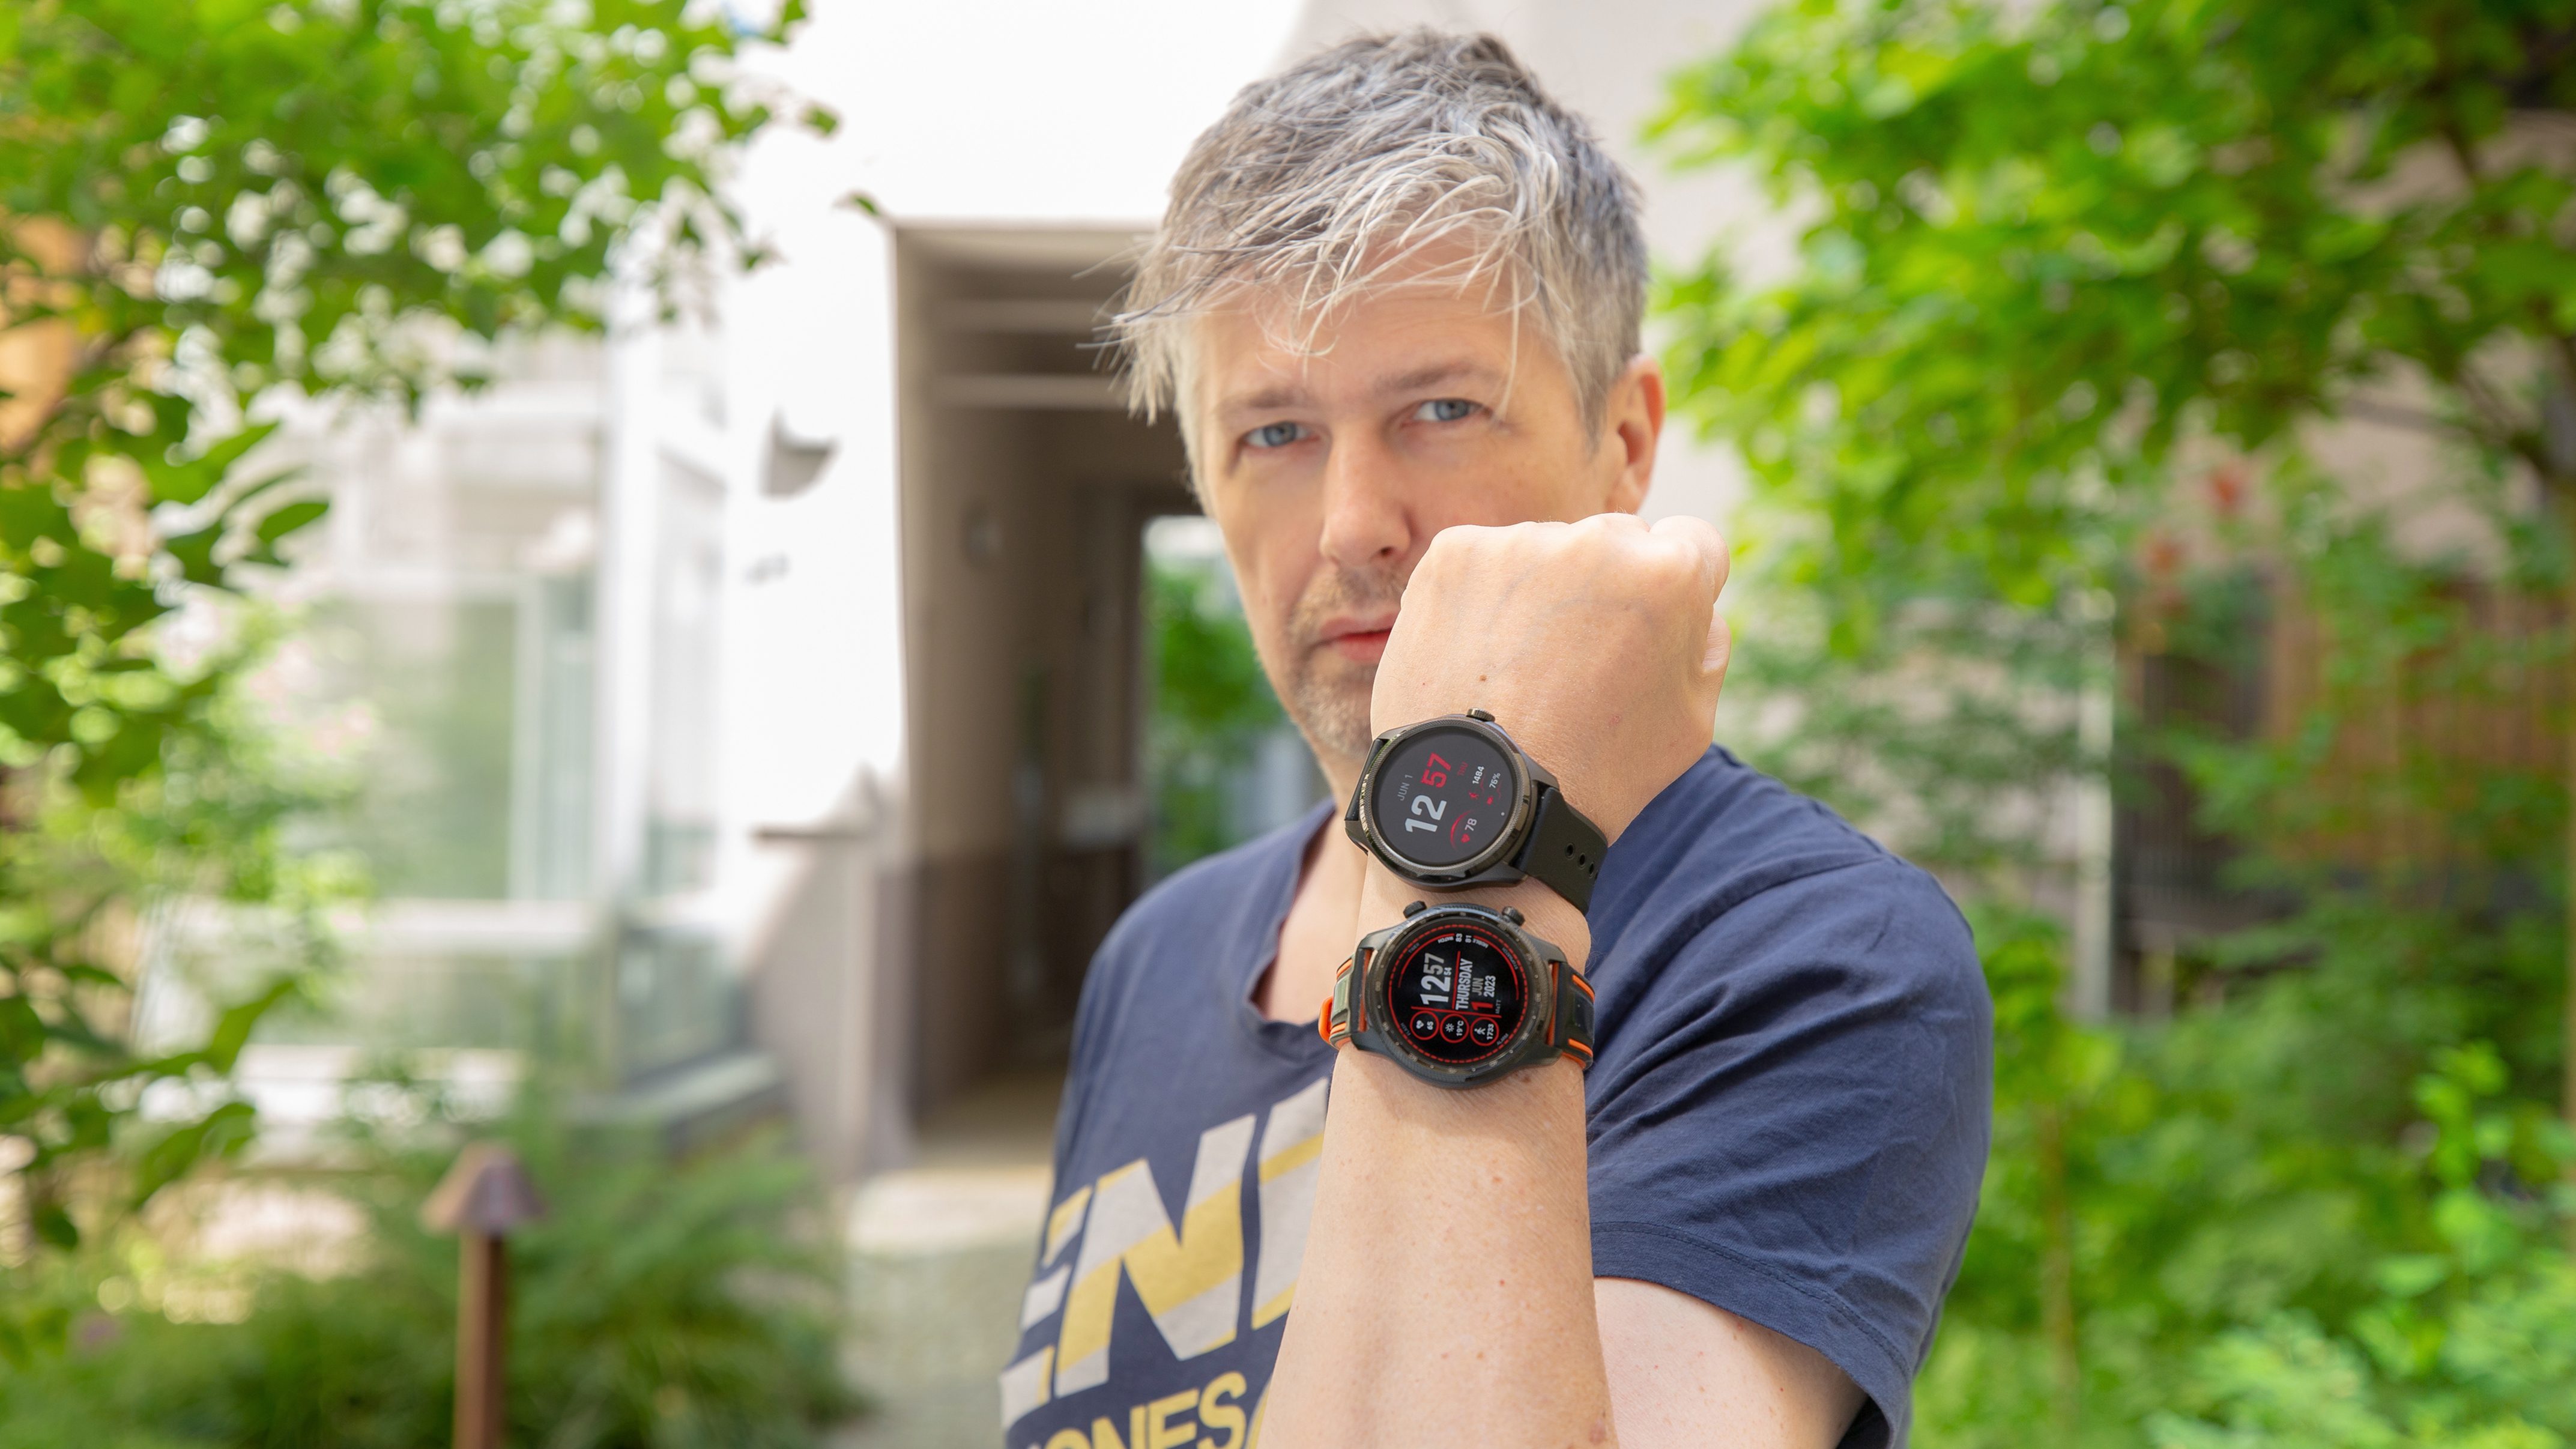 Why the Mobvoi TicWatch Pro 5 is a Great Watch!